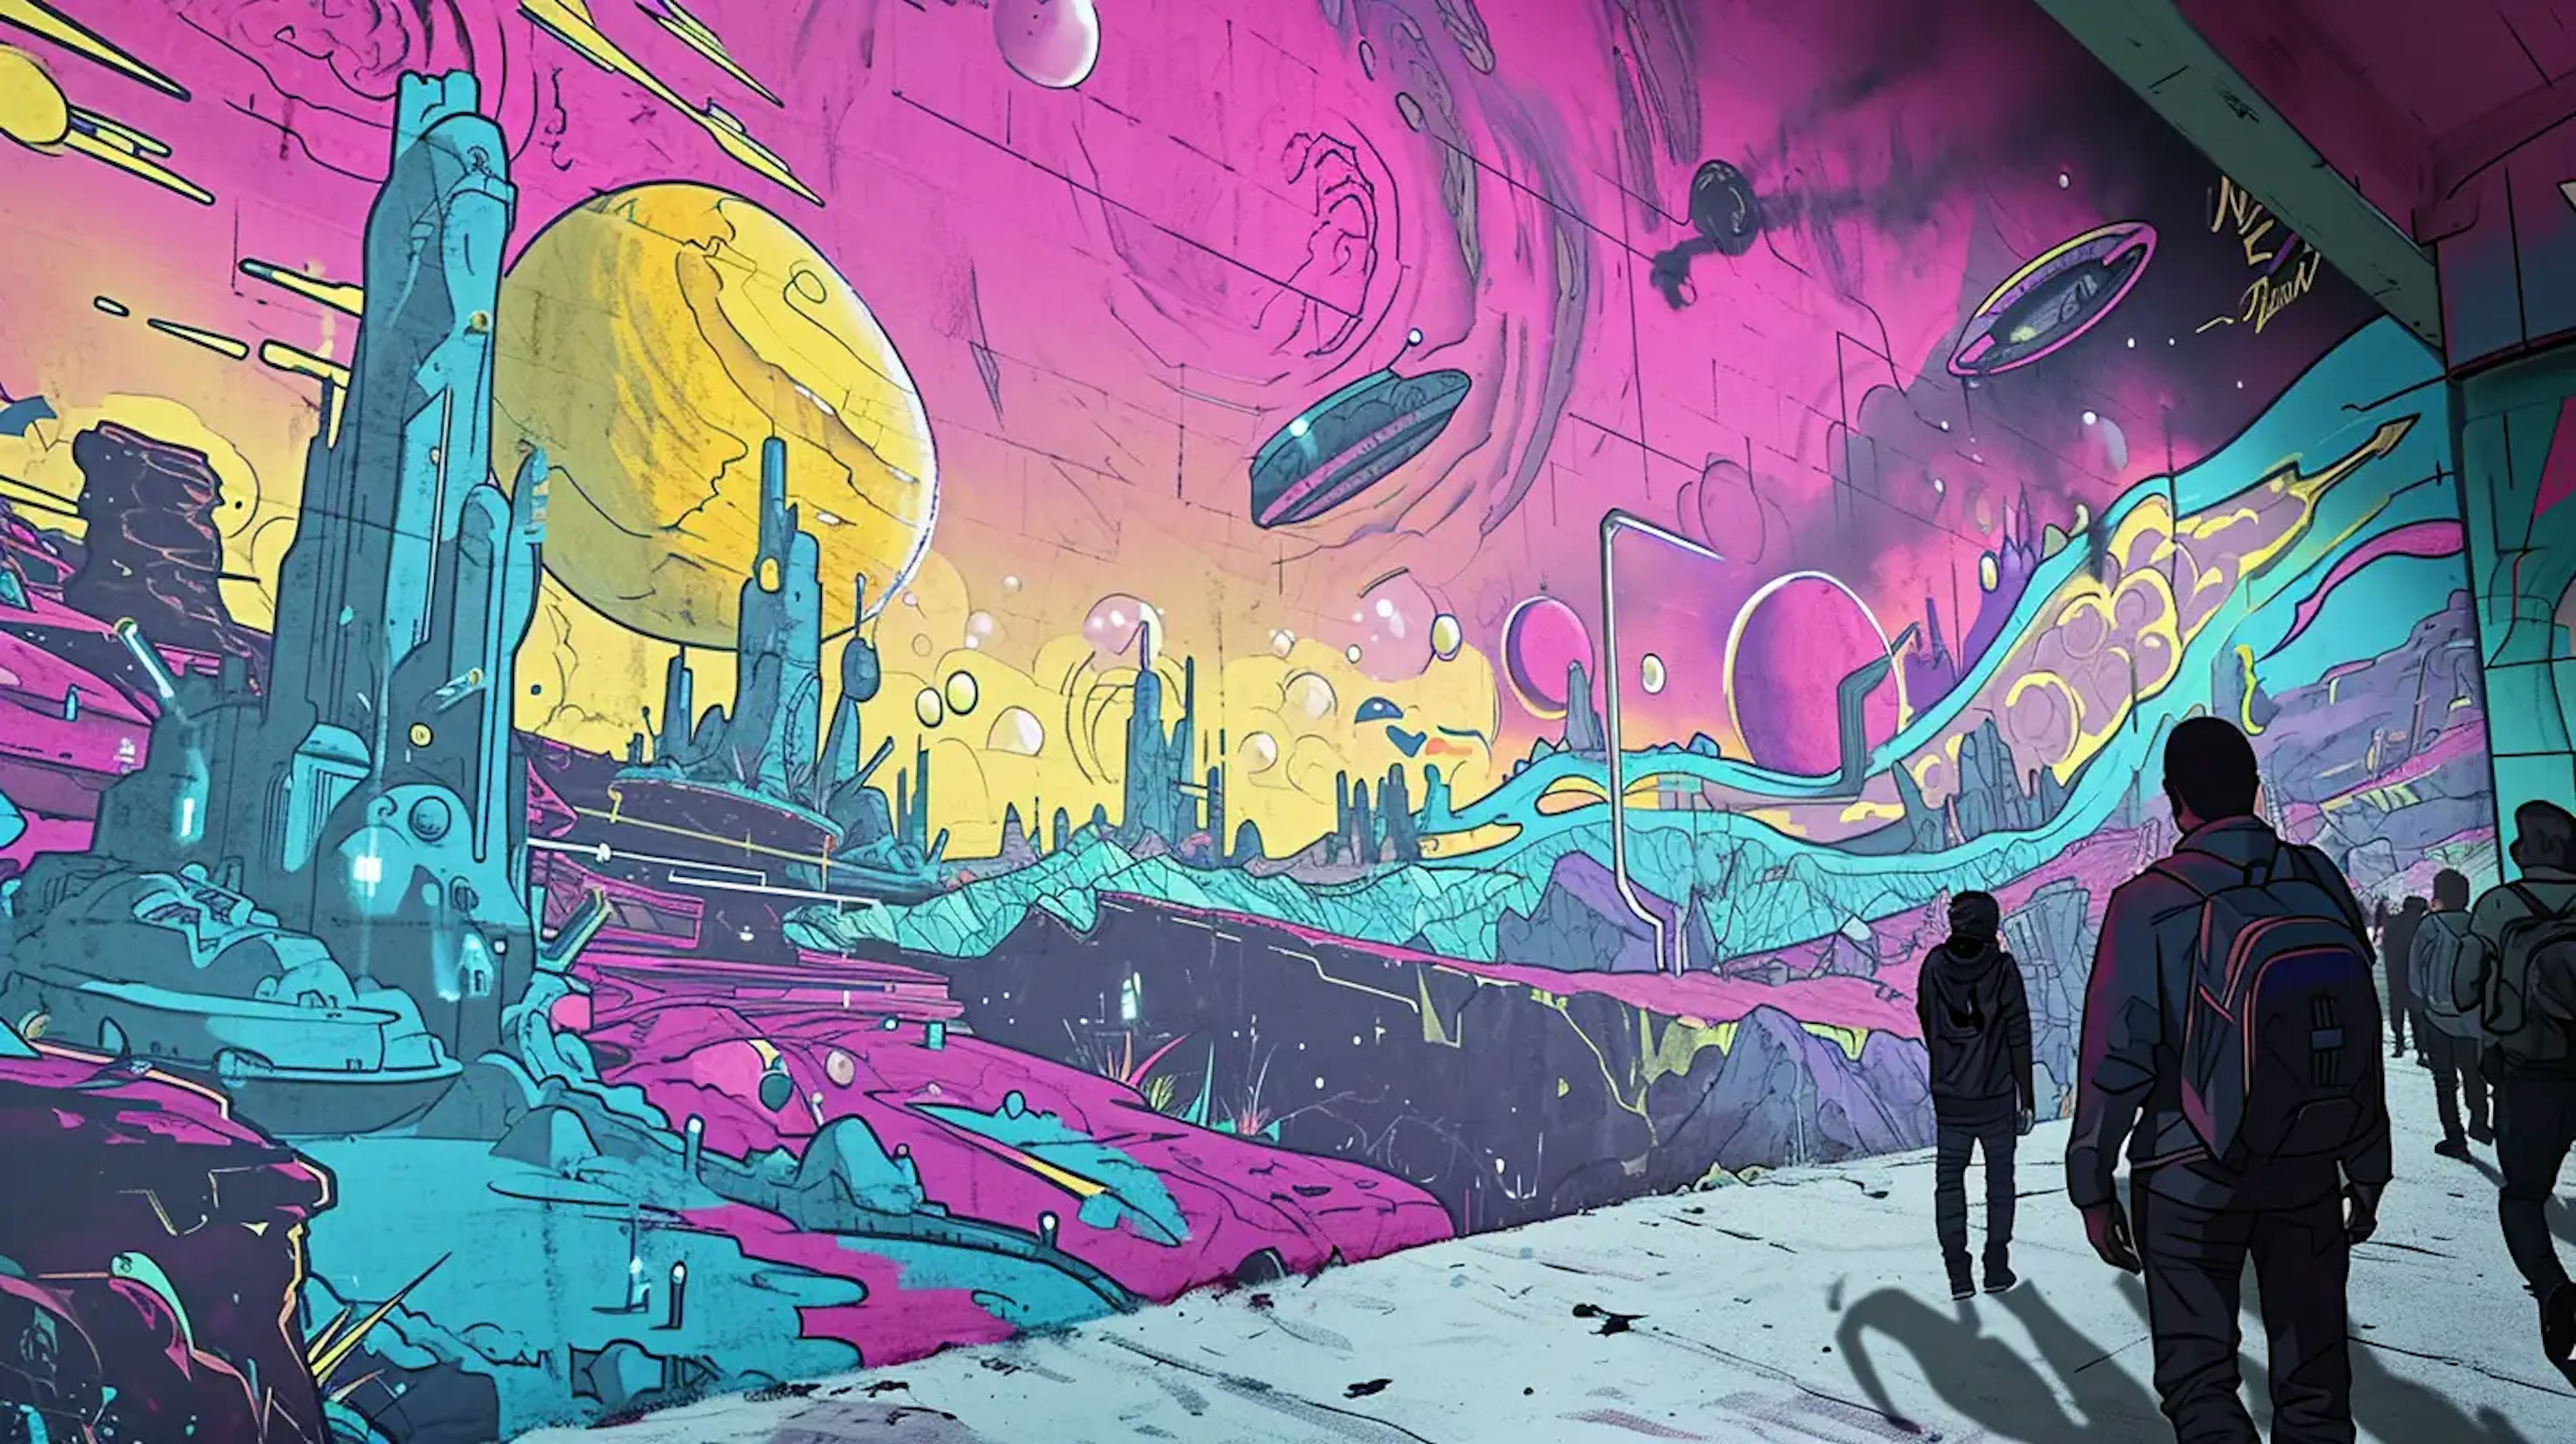 An illustration of of a brick wall with a cosmic landscapte mural.